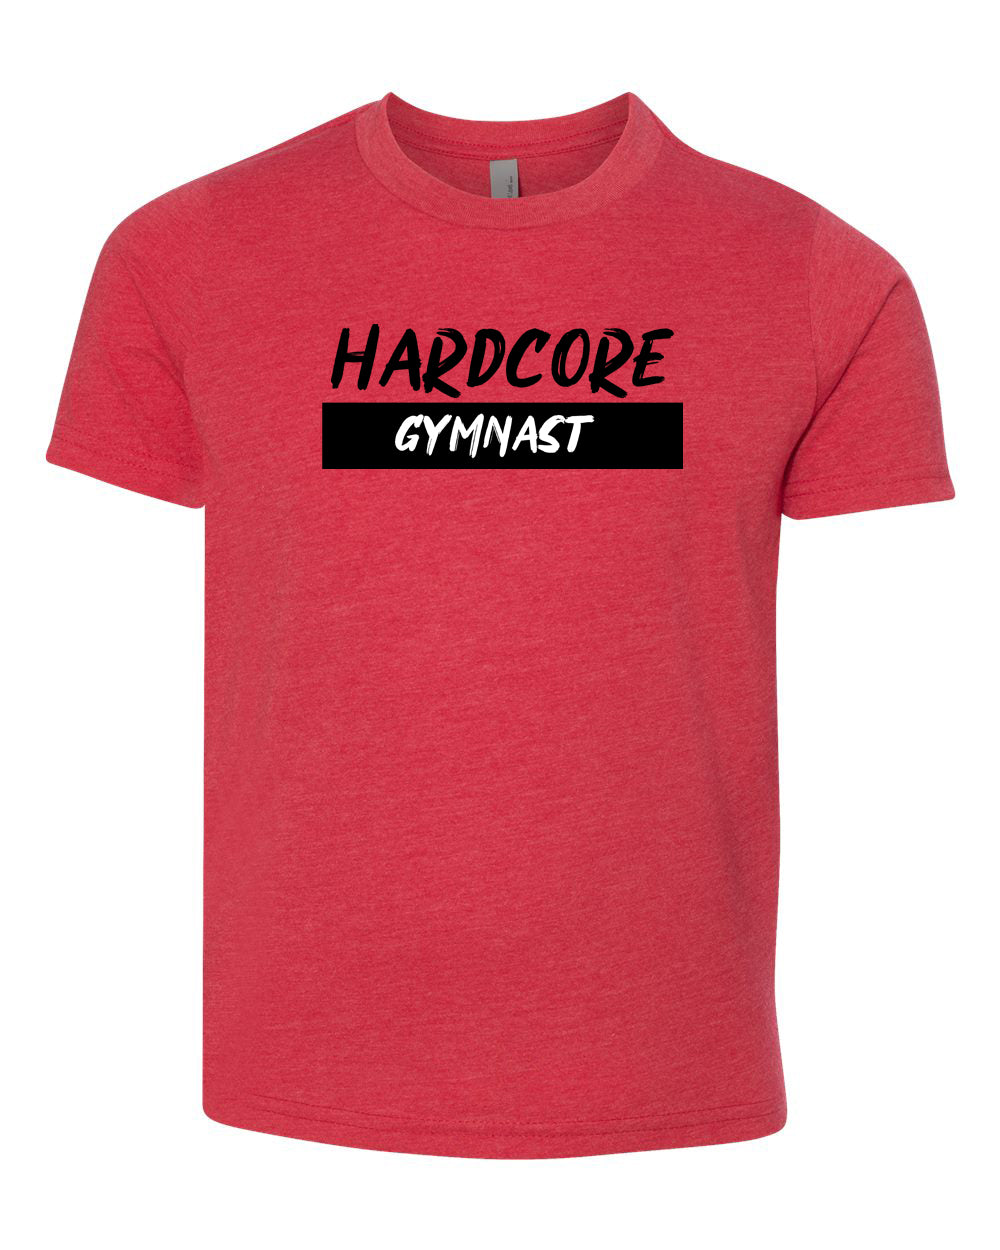 Hardcore Gymnast Youth T-Shirt Red